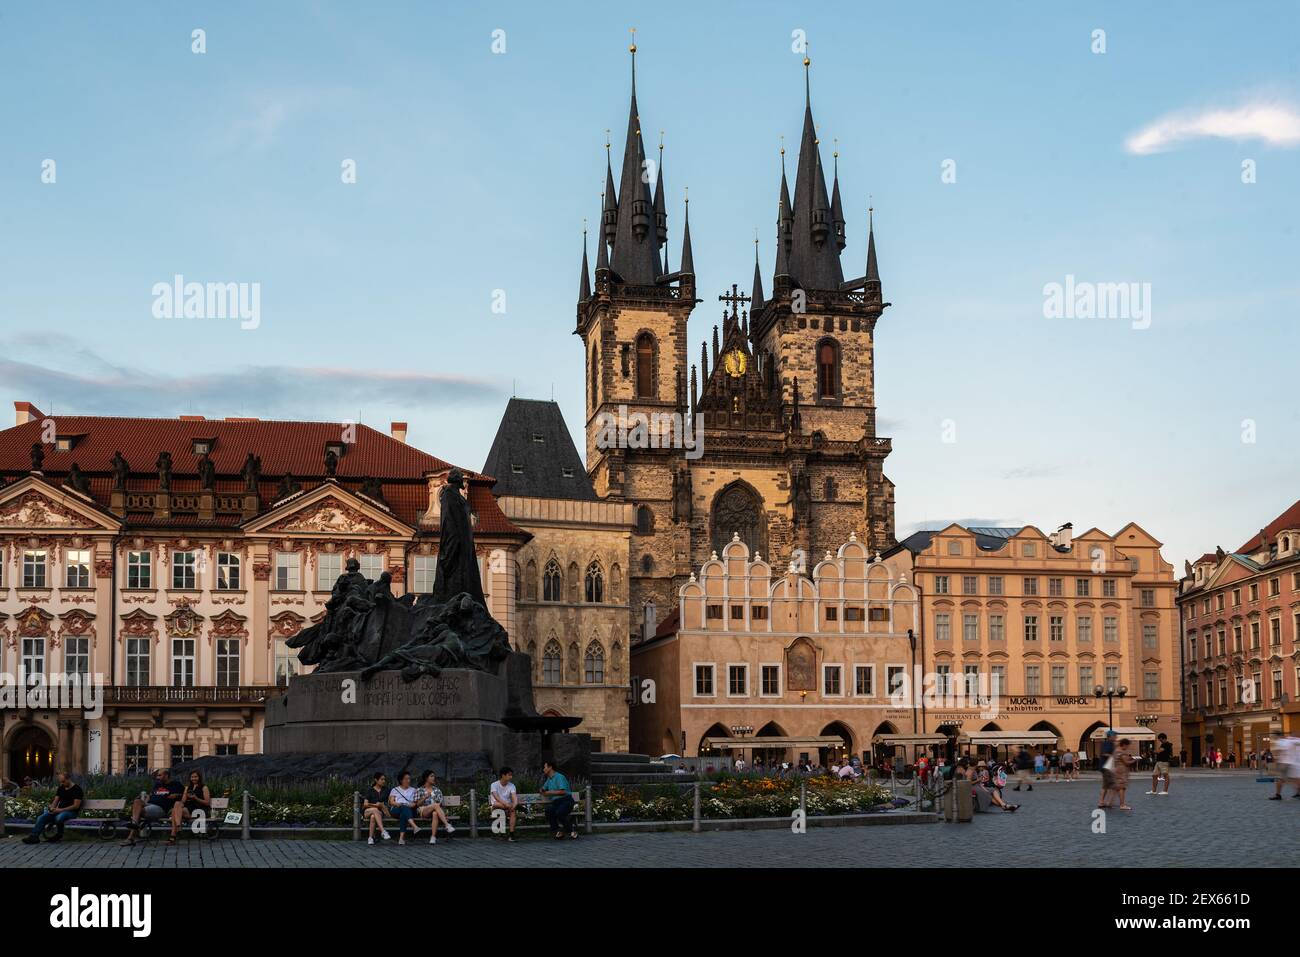 Prague - Czech Republic - 08 01 2020: The Old Town Square at dusk with the Church of Our Lady before Týn towers in the background Stock Photo